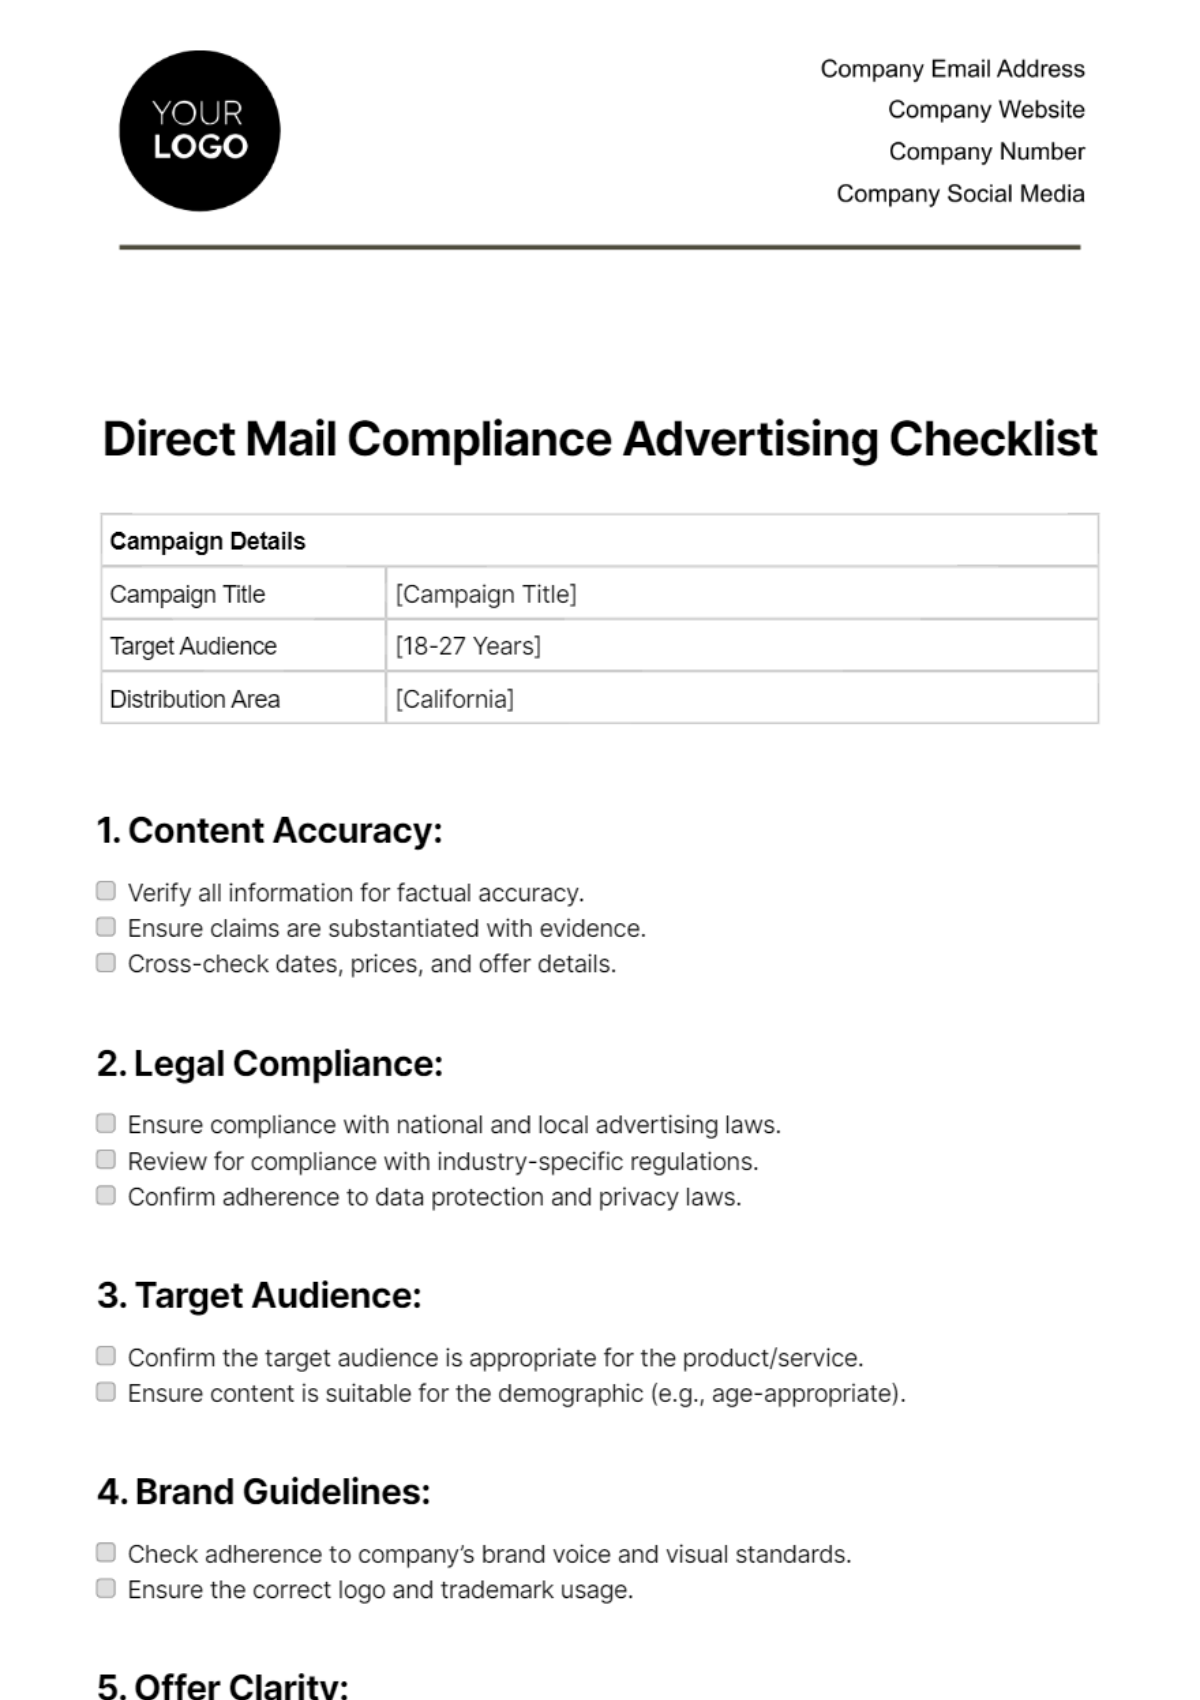 Direct Mail Compliance Advertising Checklist Template